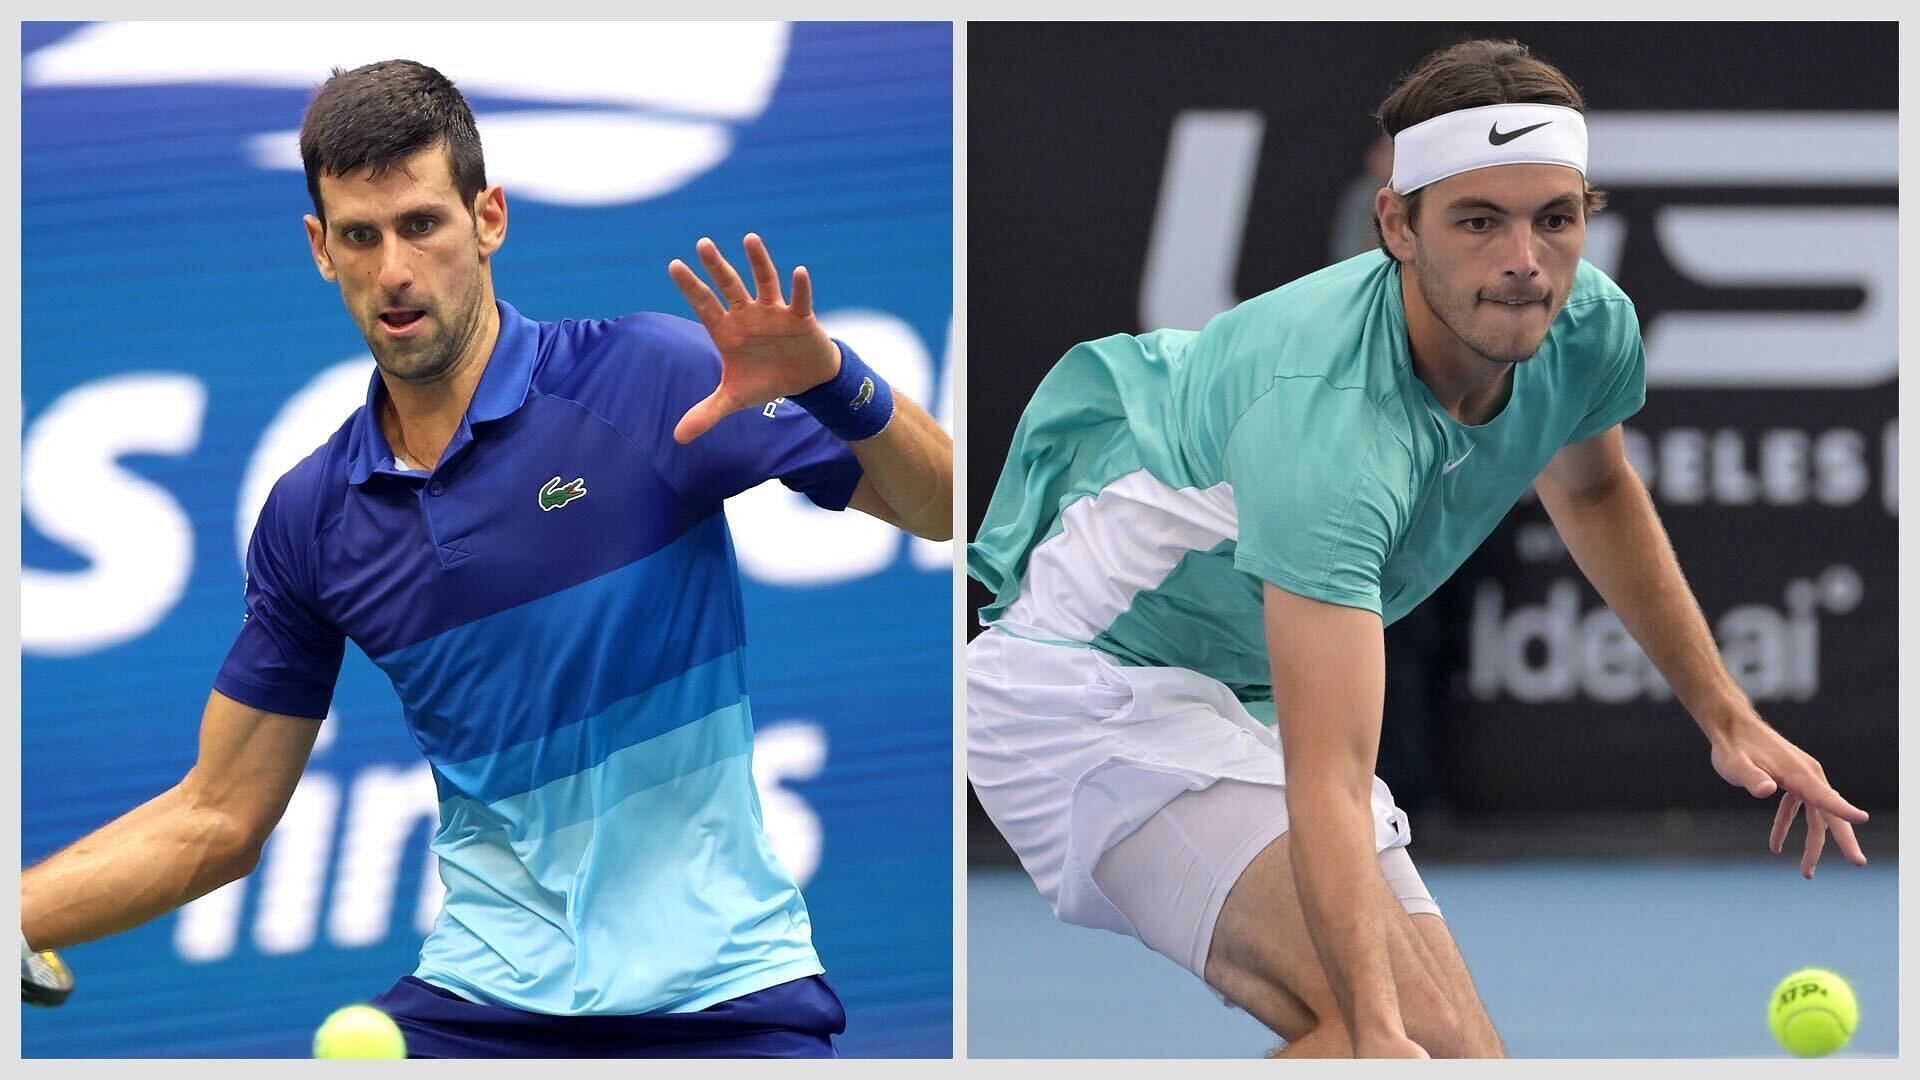 Novak Djokovic vs Taylor Fritz is one of the quarterfinal matches at the 2023 US Open.